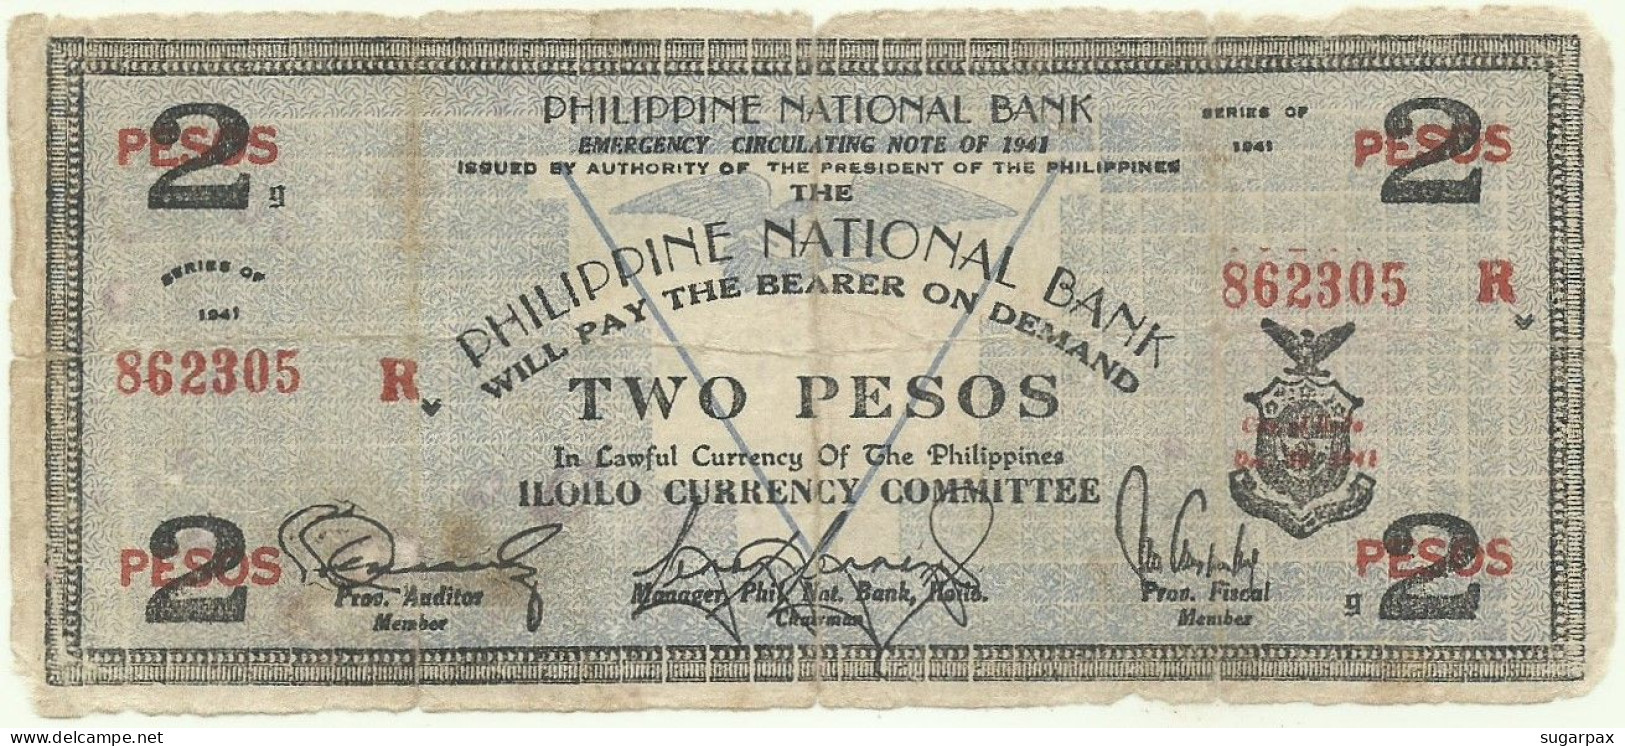 PHILIPPINES - 2 Pesos - 1941 - Pick S 306 - Serie R - ILOILO Currency Committee - Filipinas